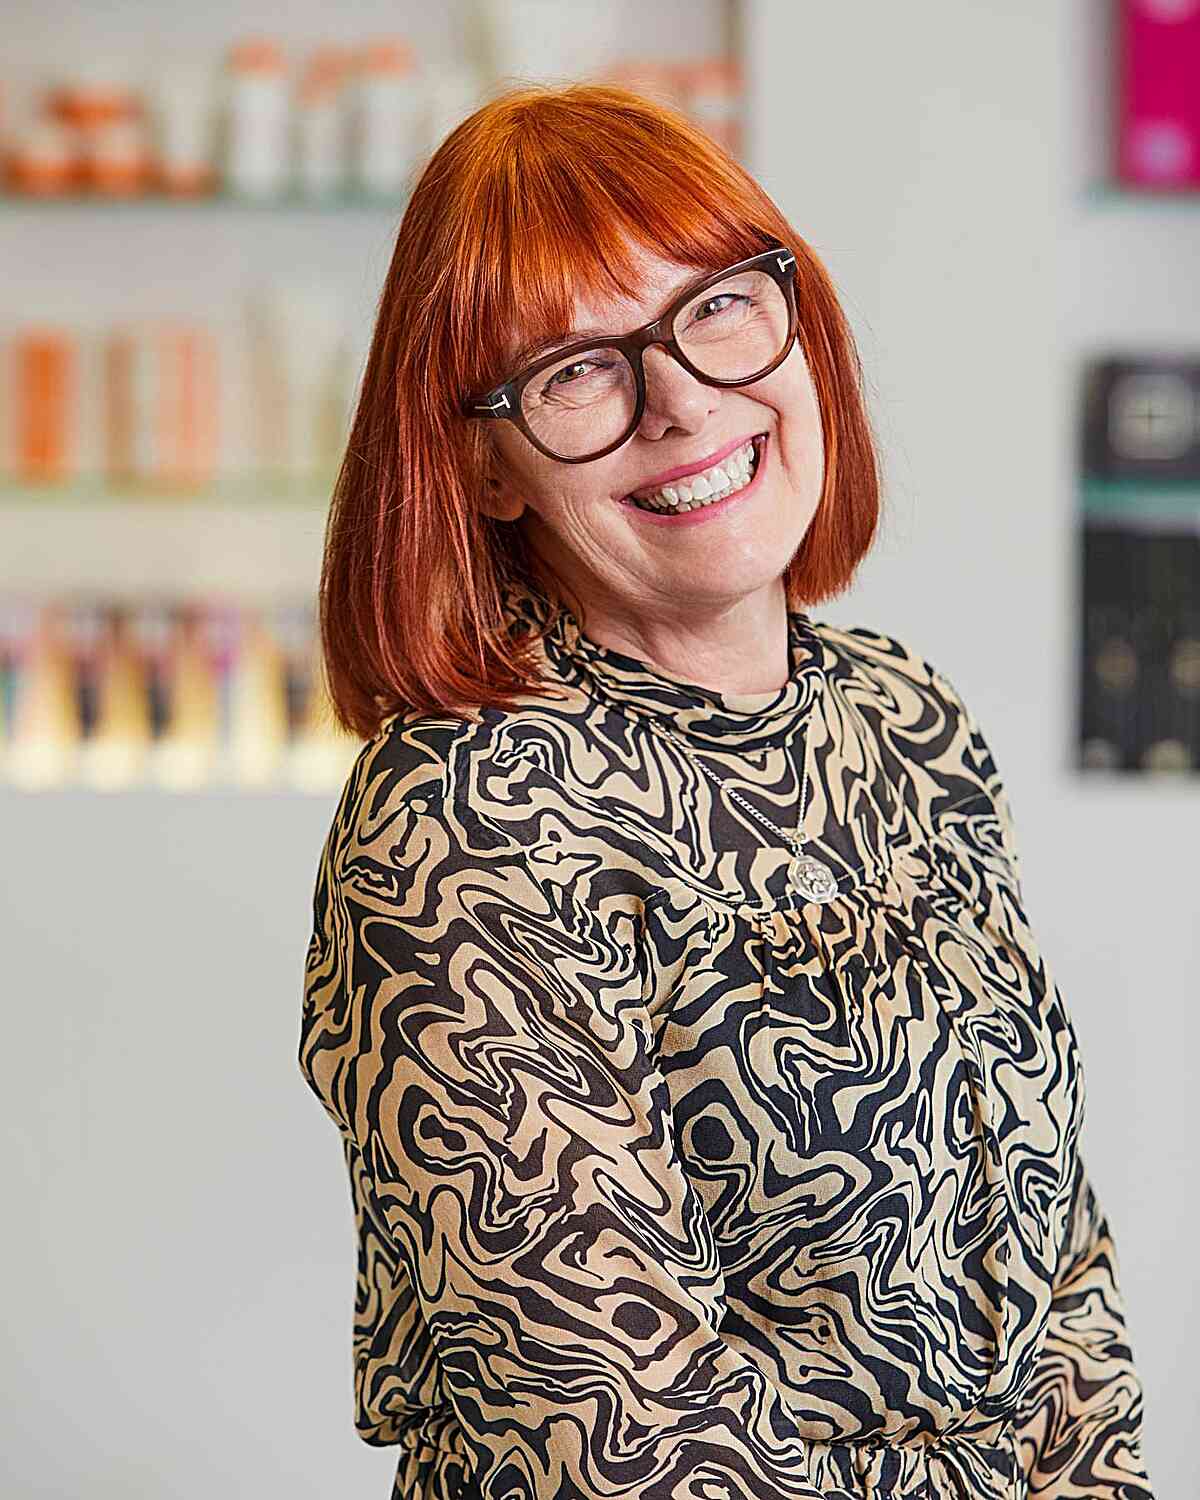 Neck-length Vivid Blunt Bob with Full Bangs for 50-year-old Ladies with Glasses